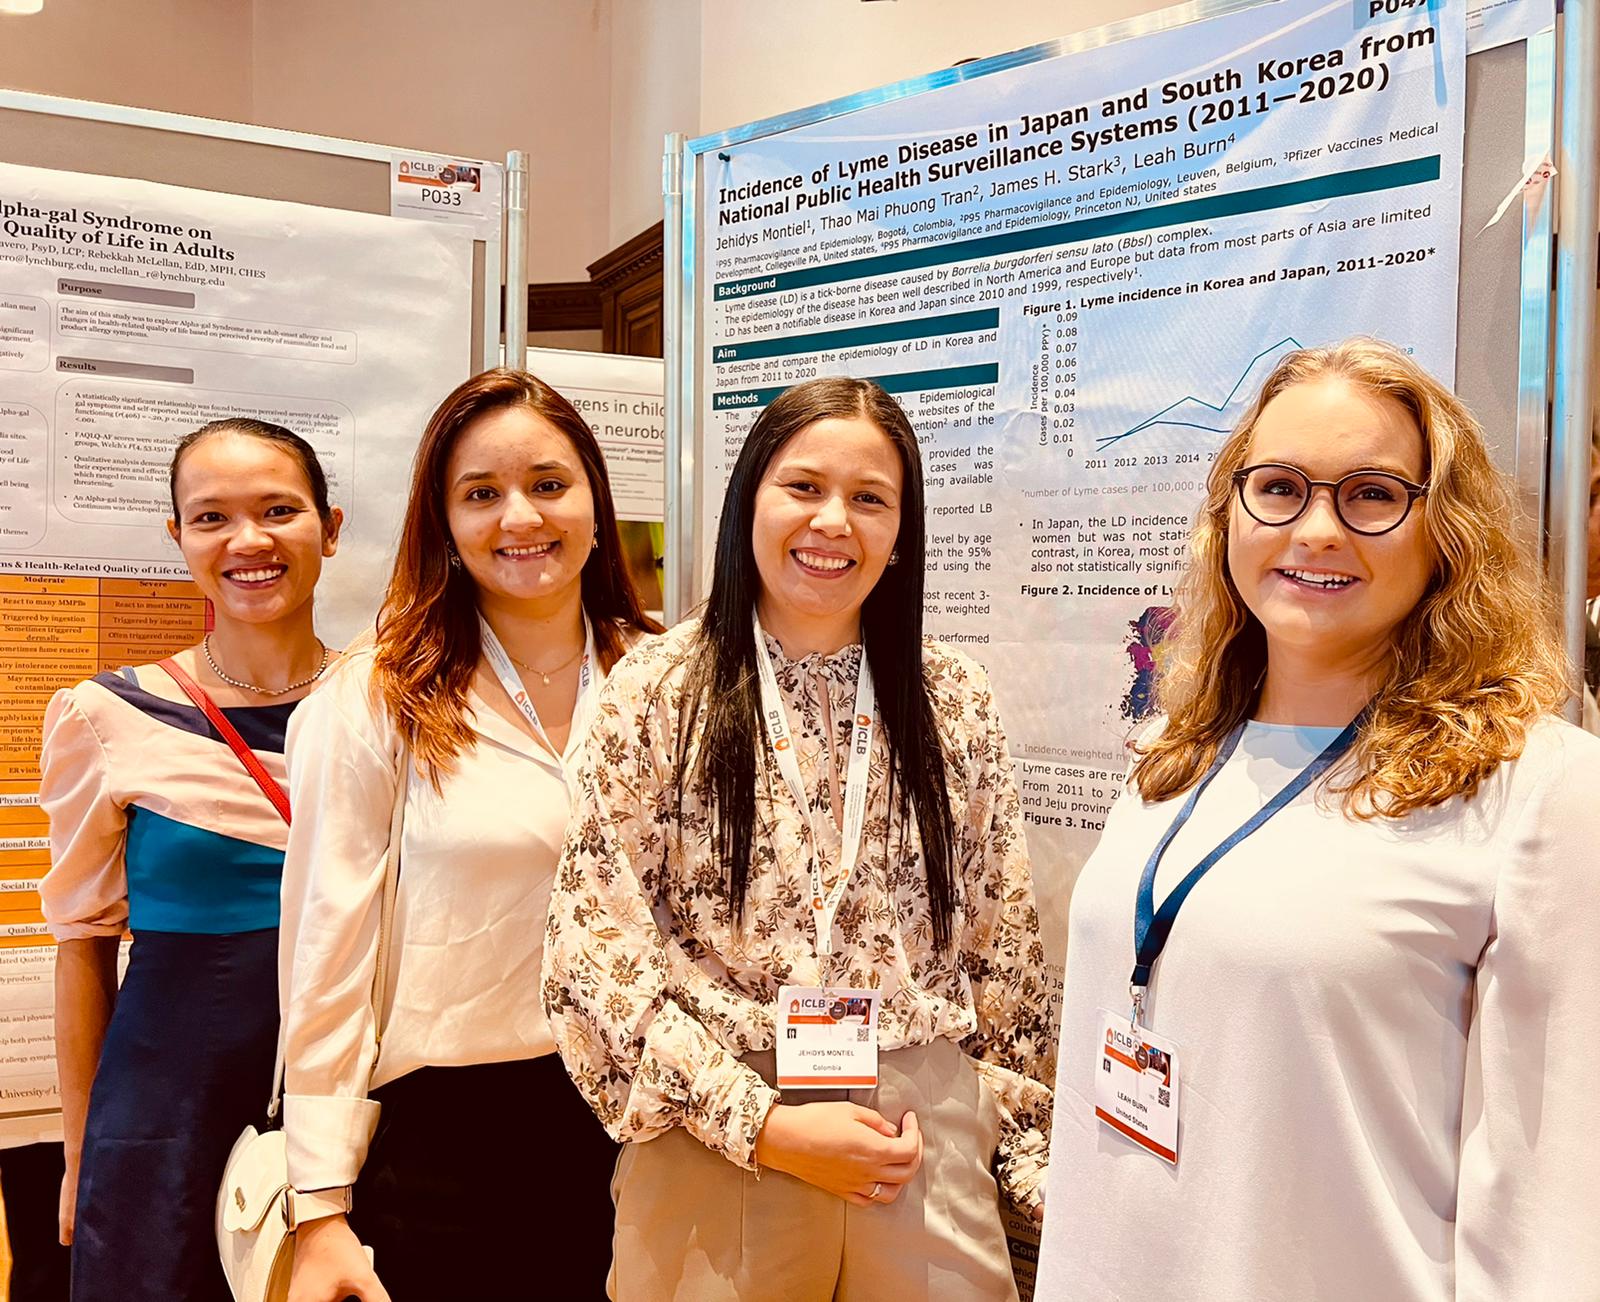 P95 presents 5 posters at the International Conference on Lyme Borreliosis 2022